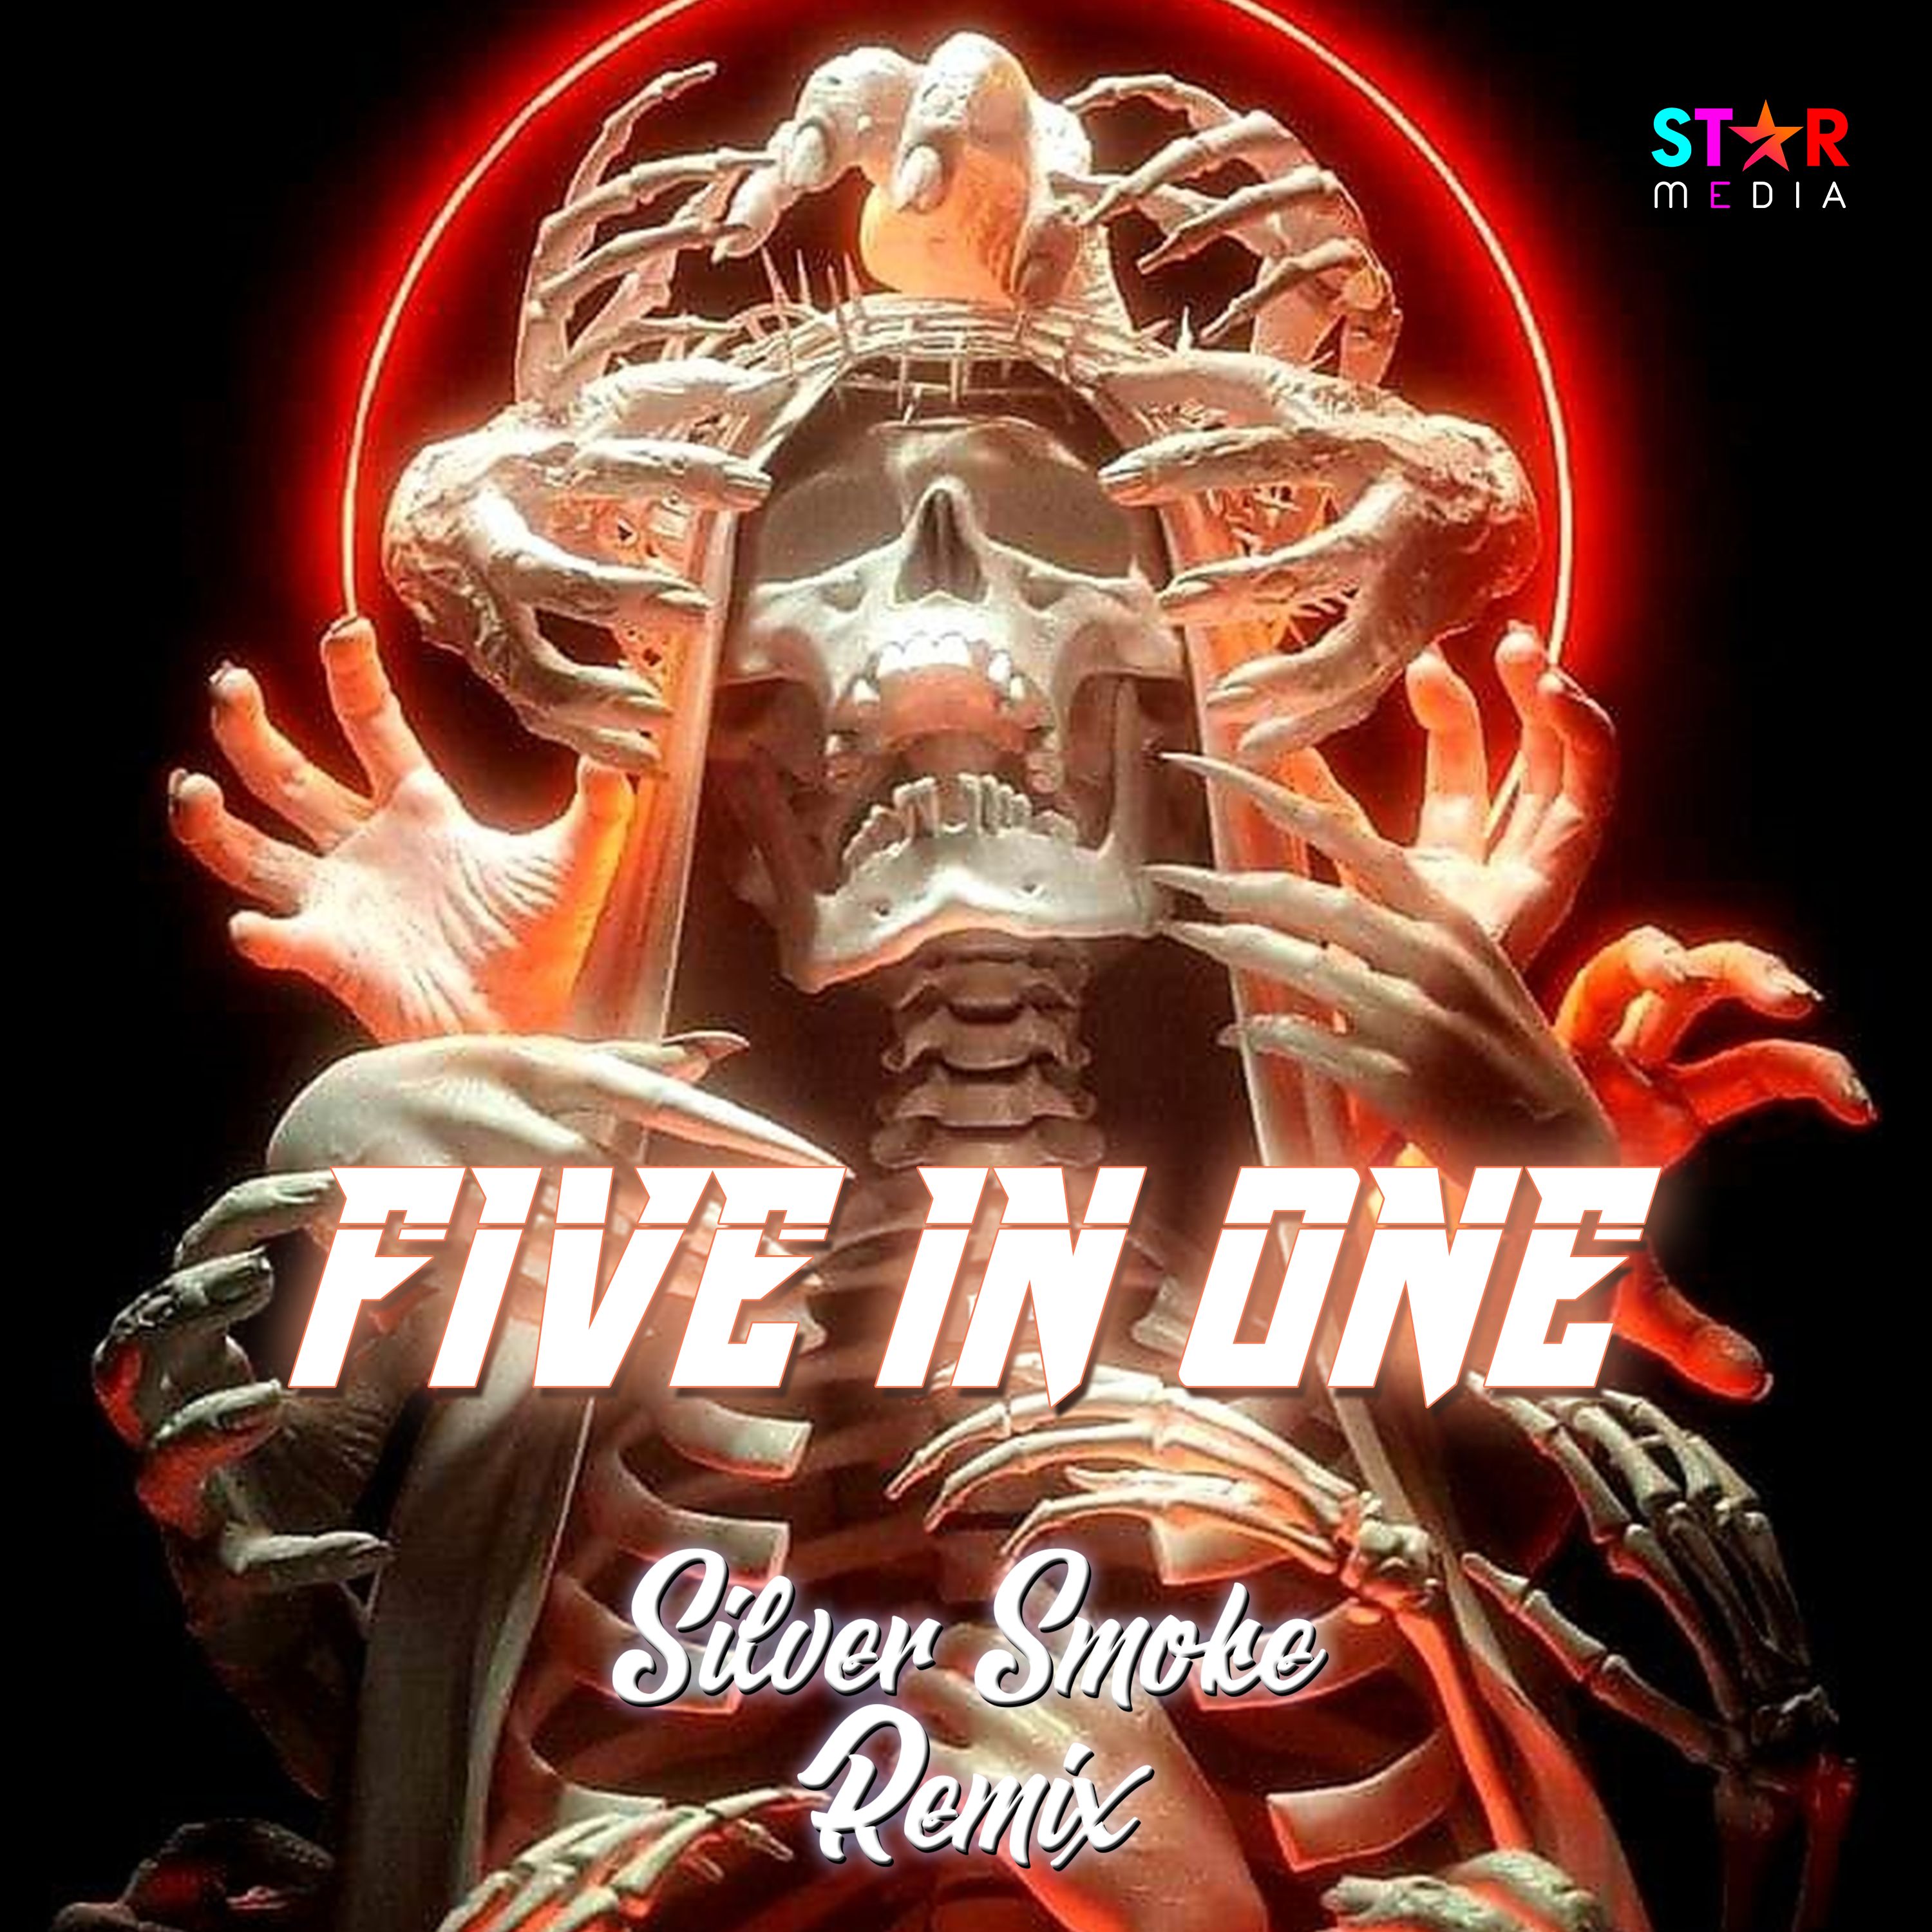 Ṣe igbasilẹ 5 IN 1 - SILVER SMOKE REMIX (Out Out,The Magic Key,Butterfly,Party Started,Bóng Tối Trước Bình Minh)